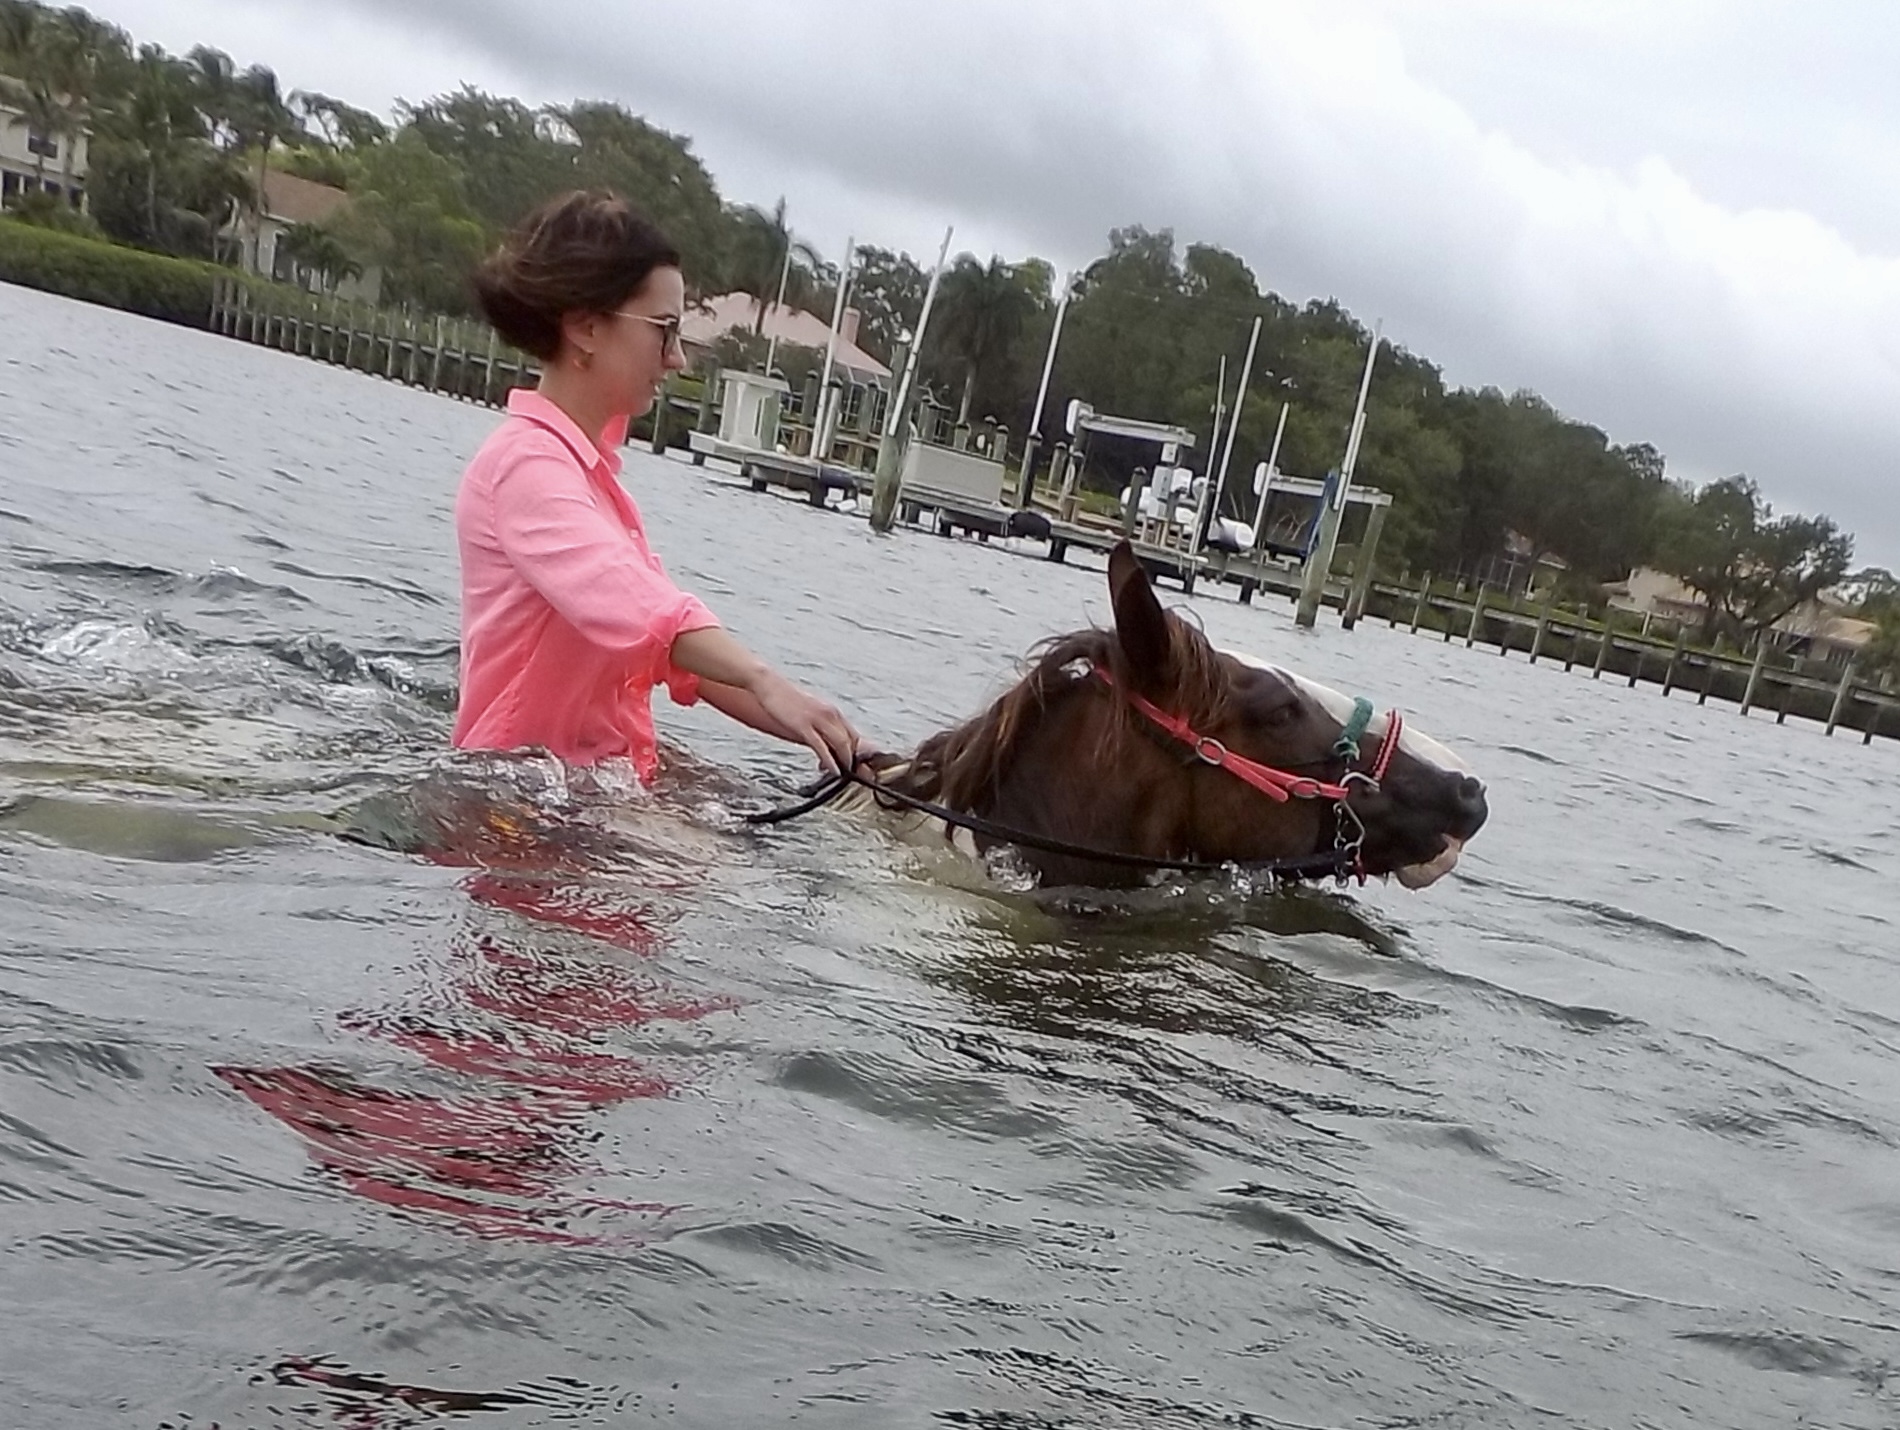 Lindsey of Have Clothes, Will Travel swimming with horses in Bradenton, Florida - great day trip from Ruskin!